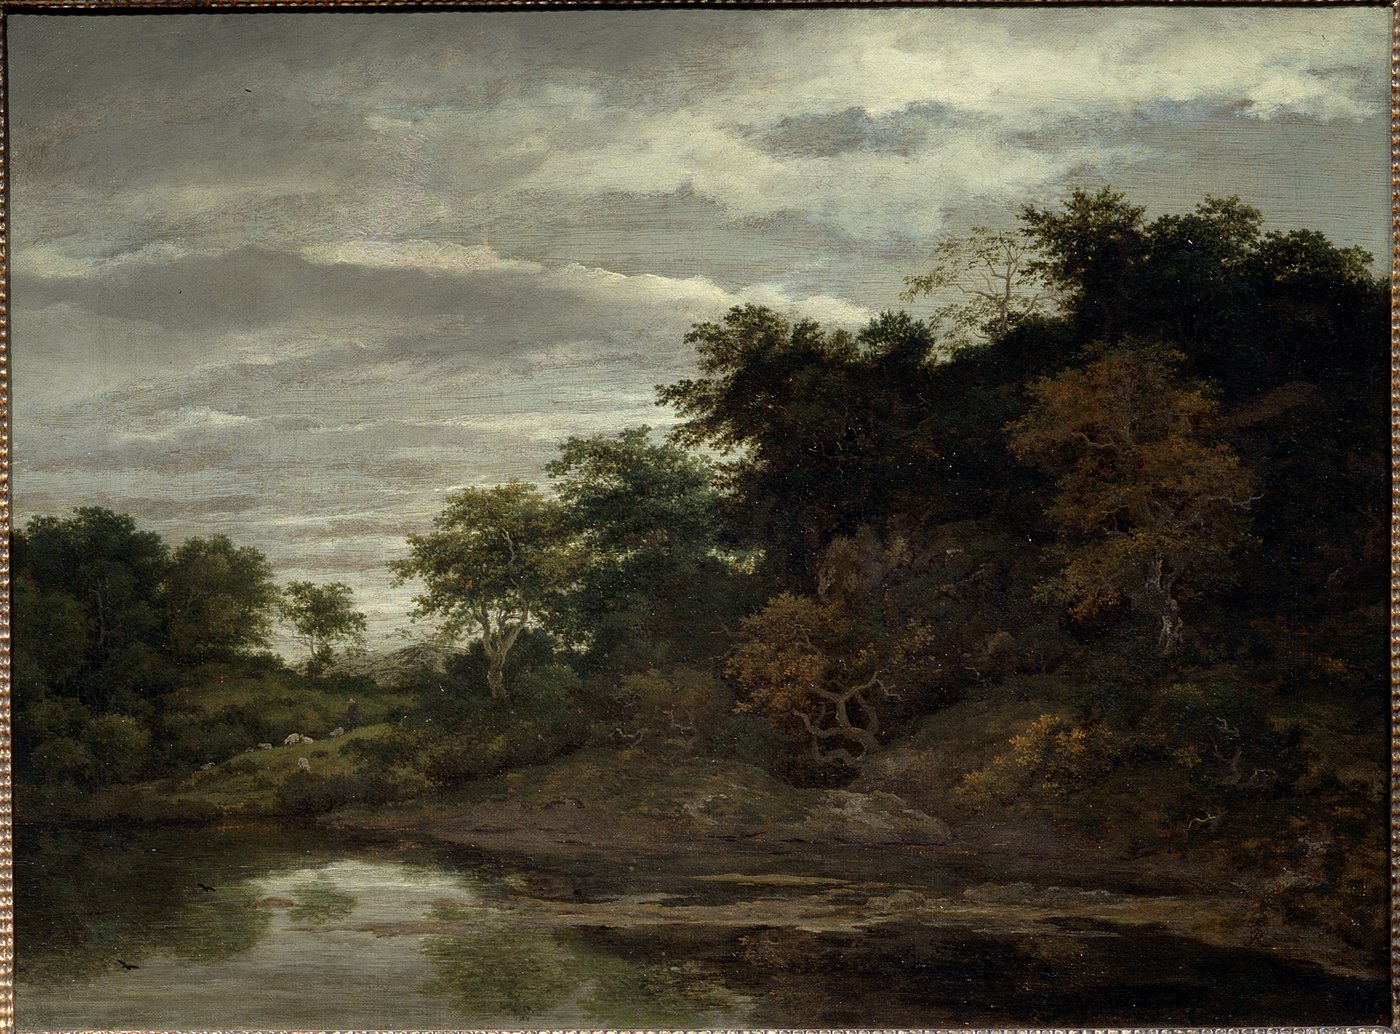 Landscape painting with cloudy sky and a forest landscape near a pond or river and a field where white sheep are grazing.